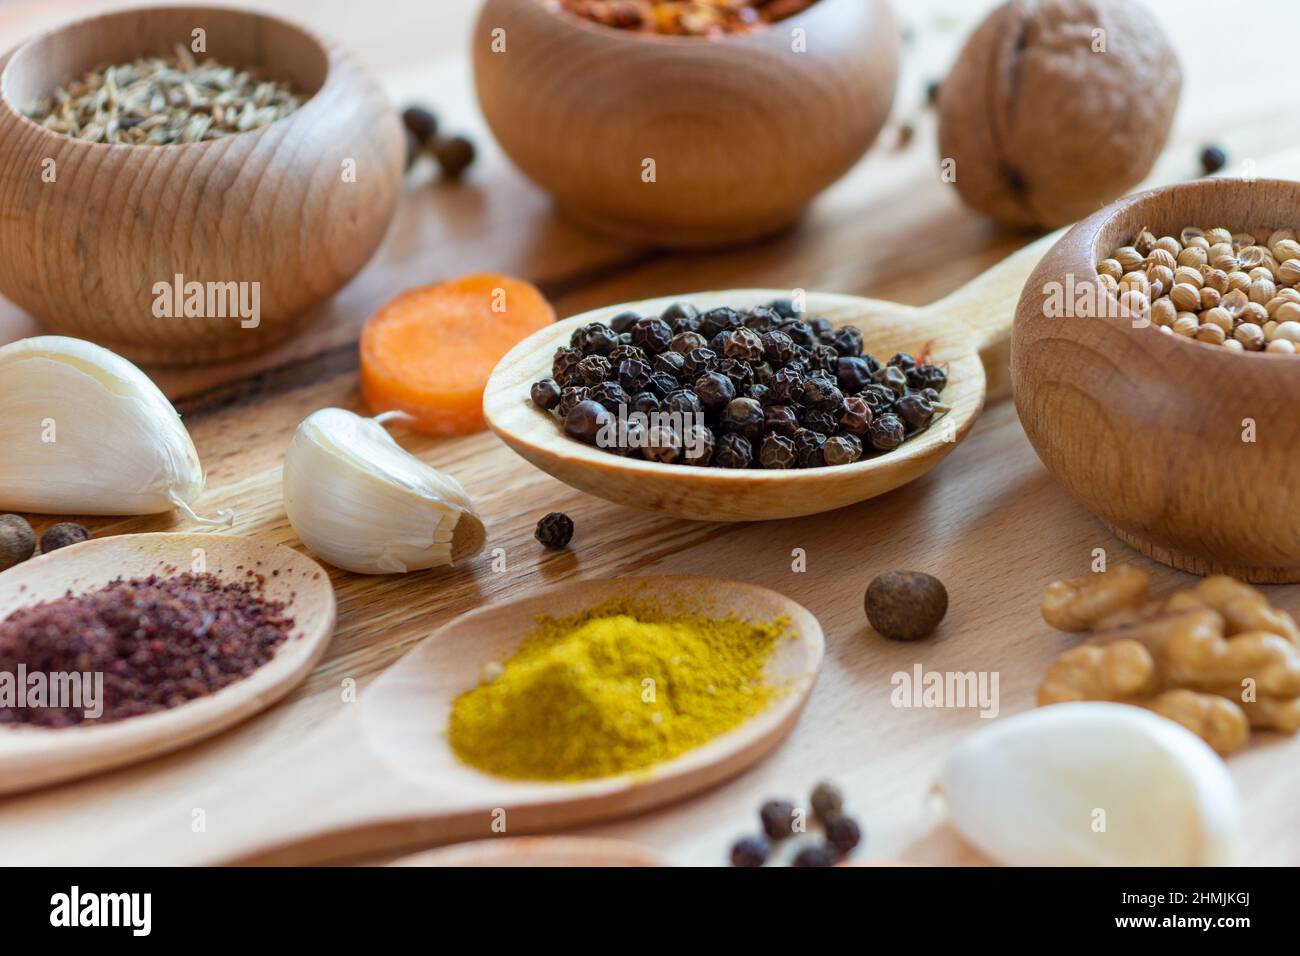 Different spices arranged in wooden spoons and bowls over wooden board Stock Photo